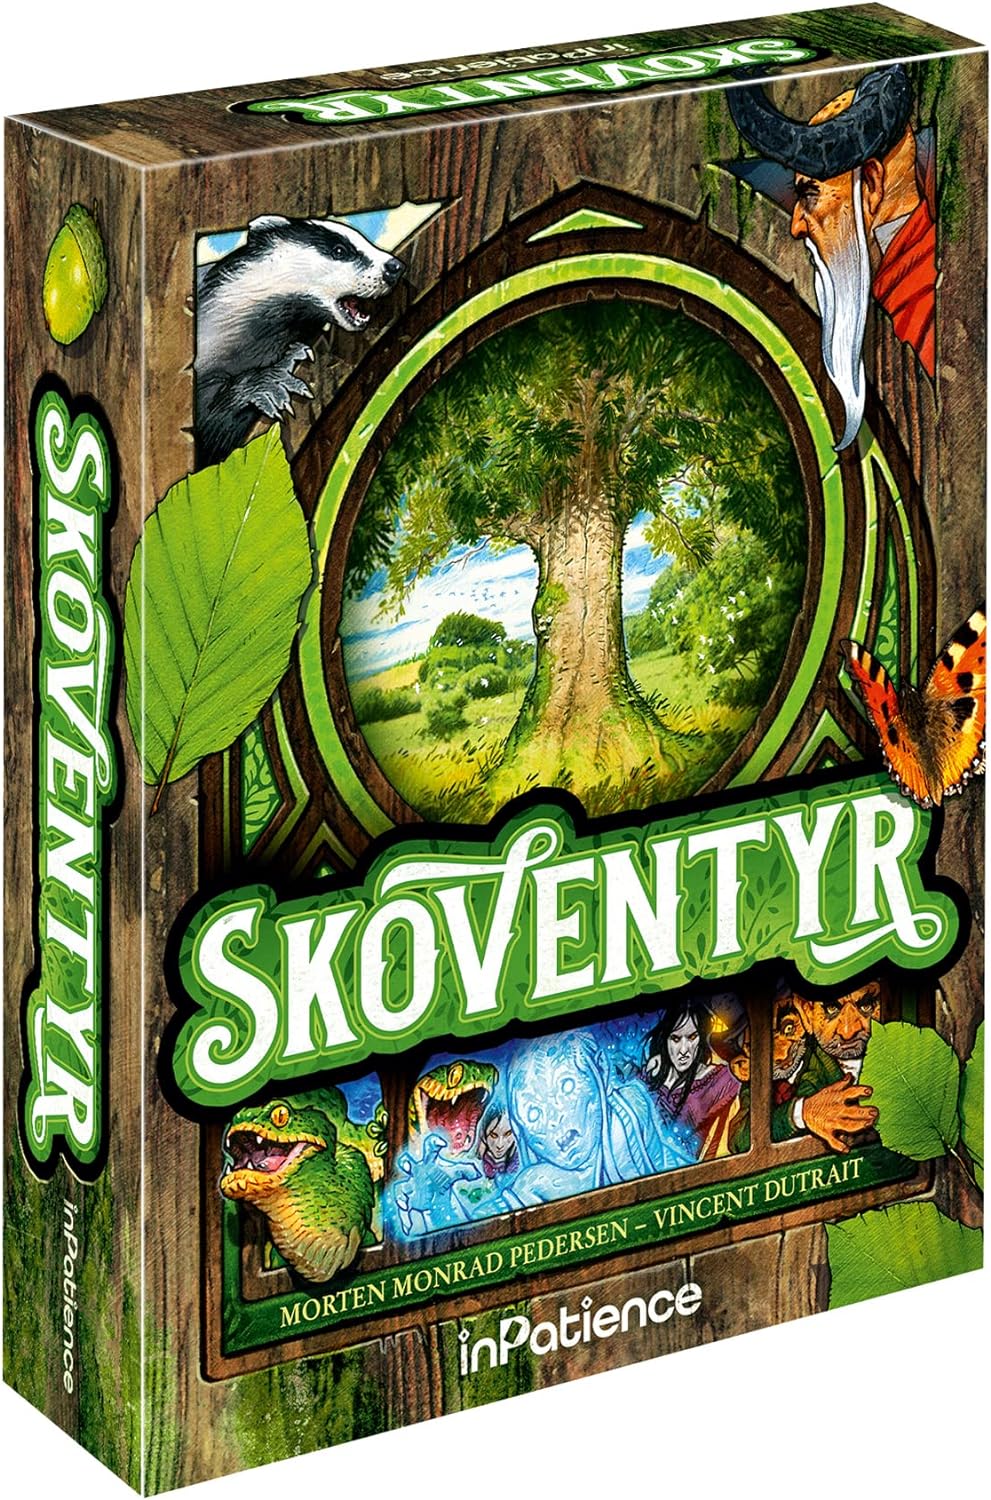 Skoventyr Board Game | Cooperative Strategy Game Based on Danish Mythology | Fun Family Game for Kids and Adults